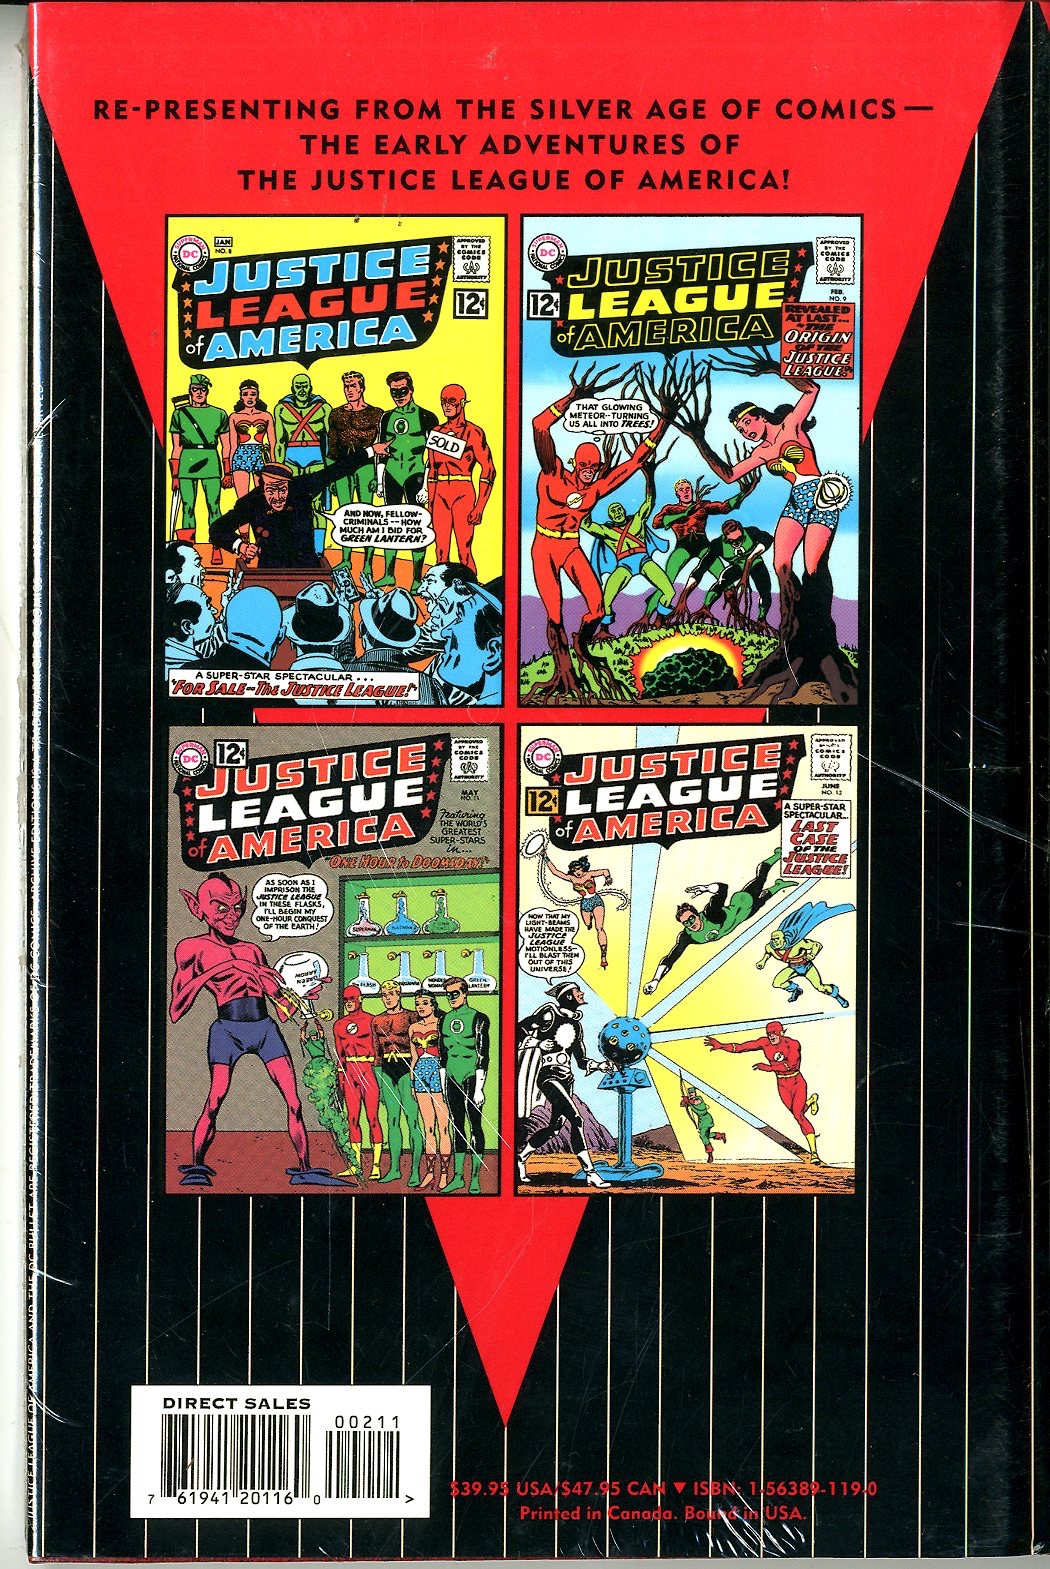 Archive Editions Justice League Of America - 11245